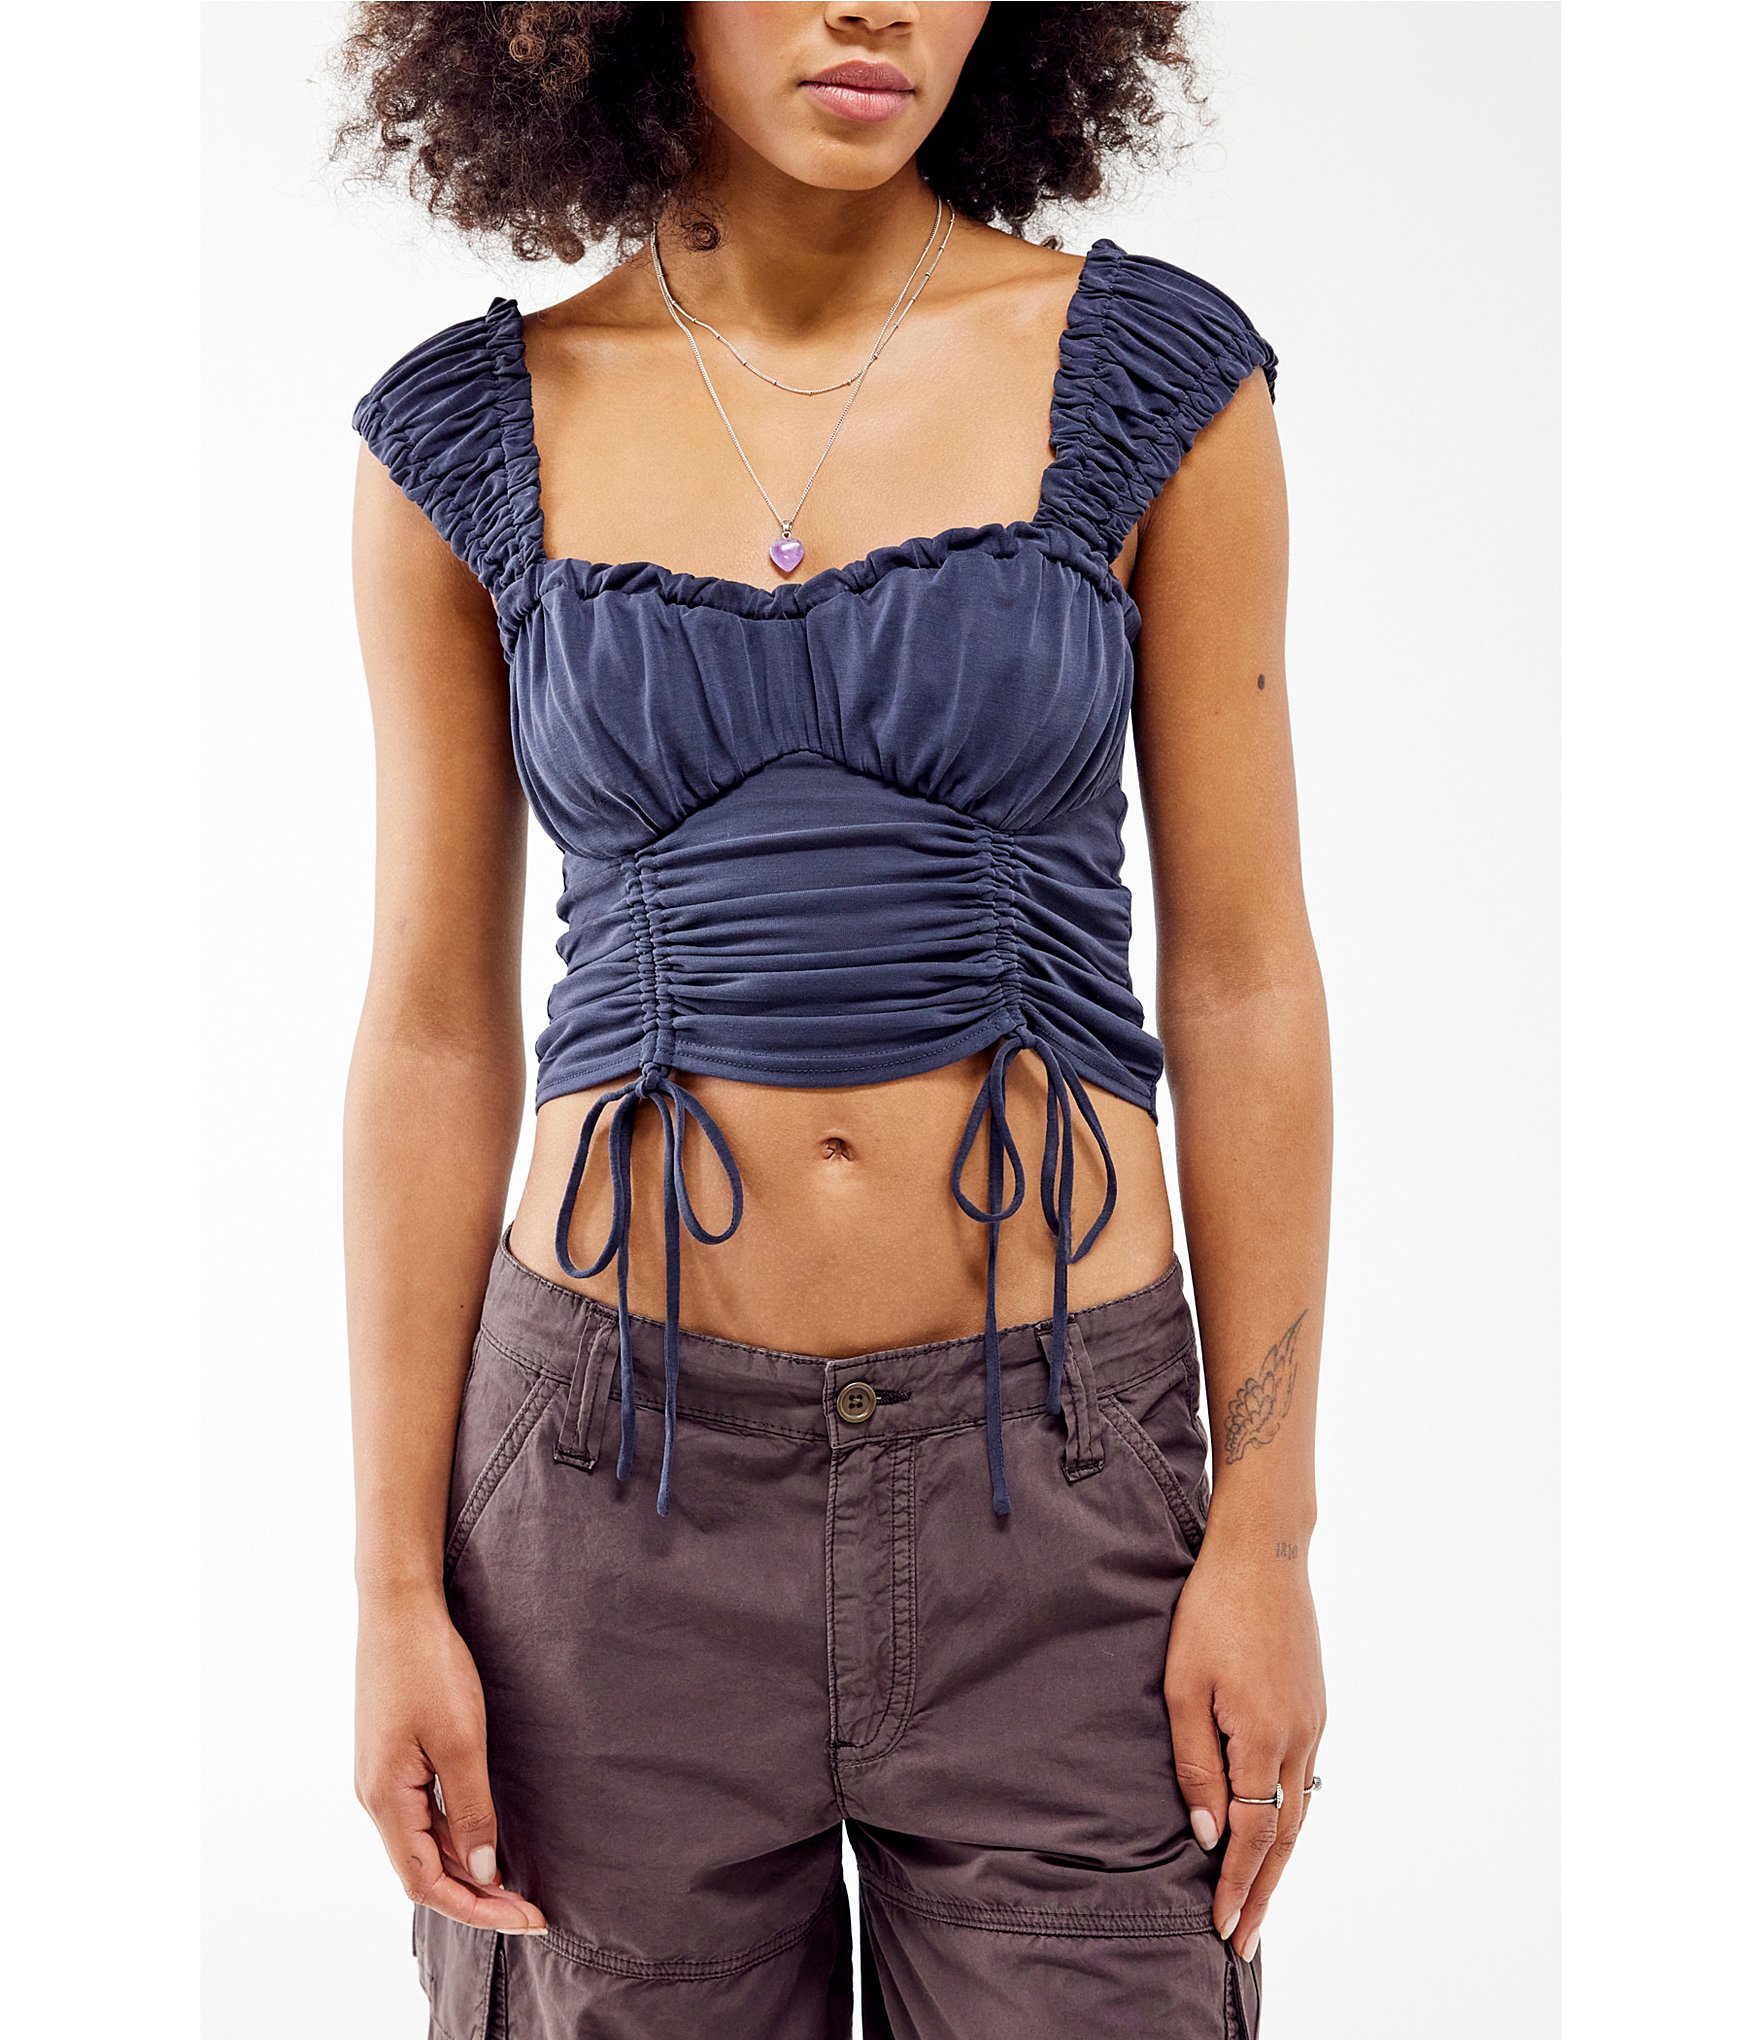 Urban Outfitters' Extreme Crop Tank Top Shrug Is Breaking the